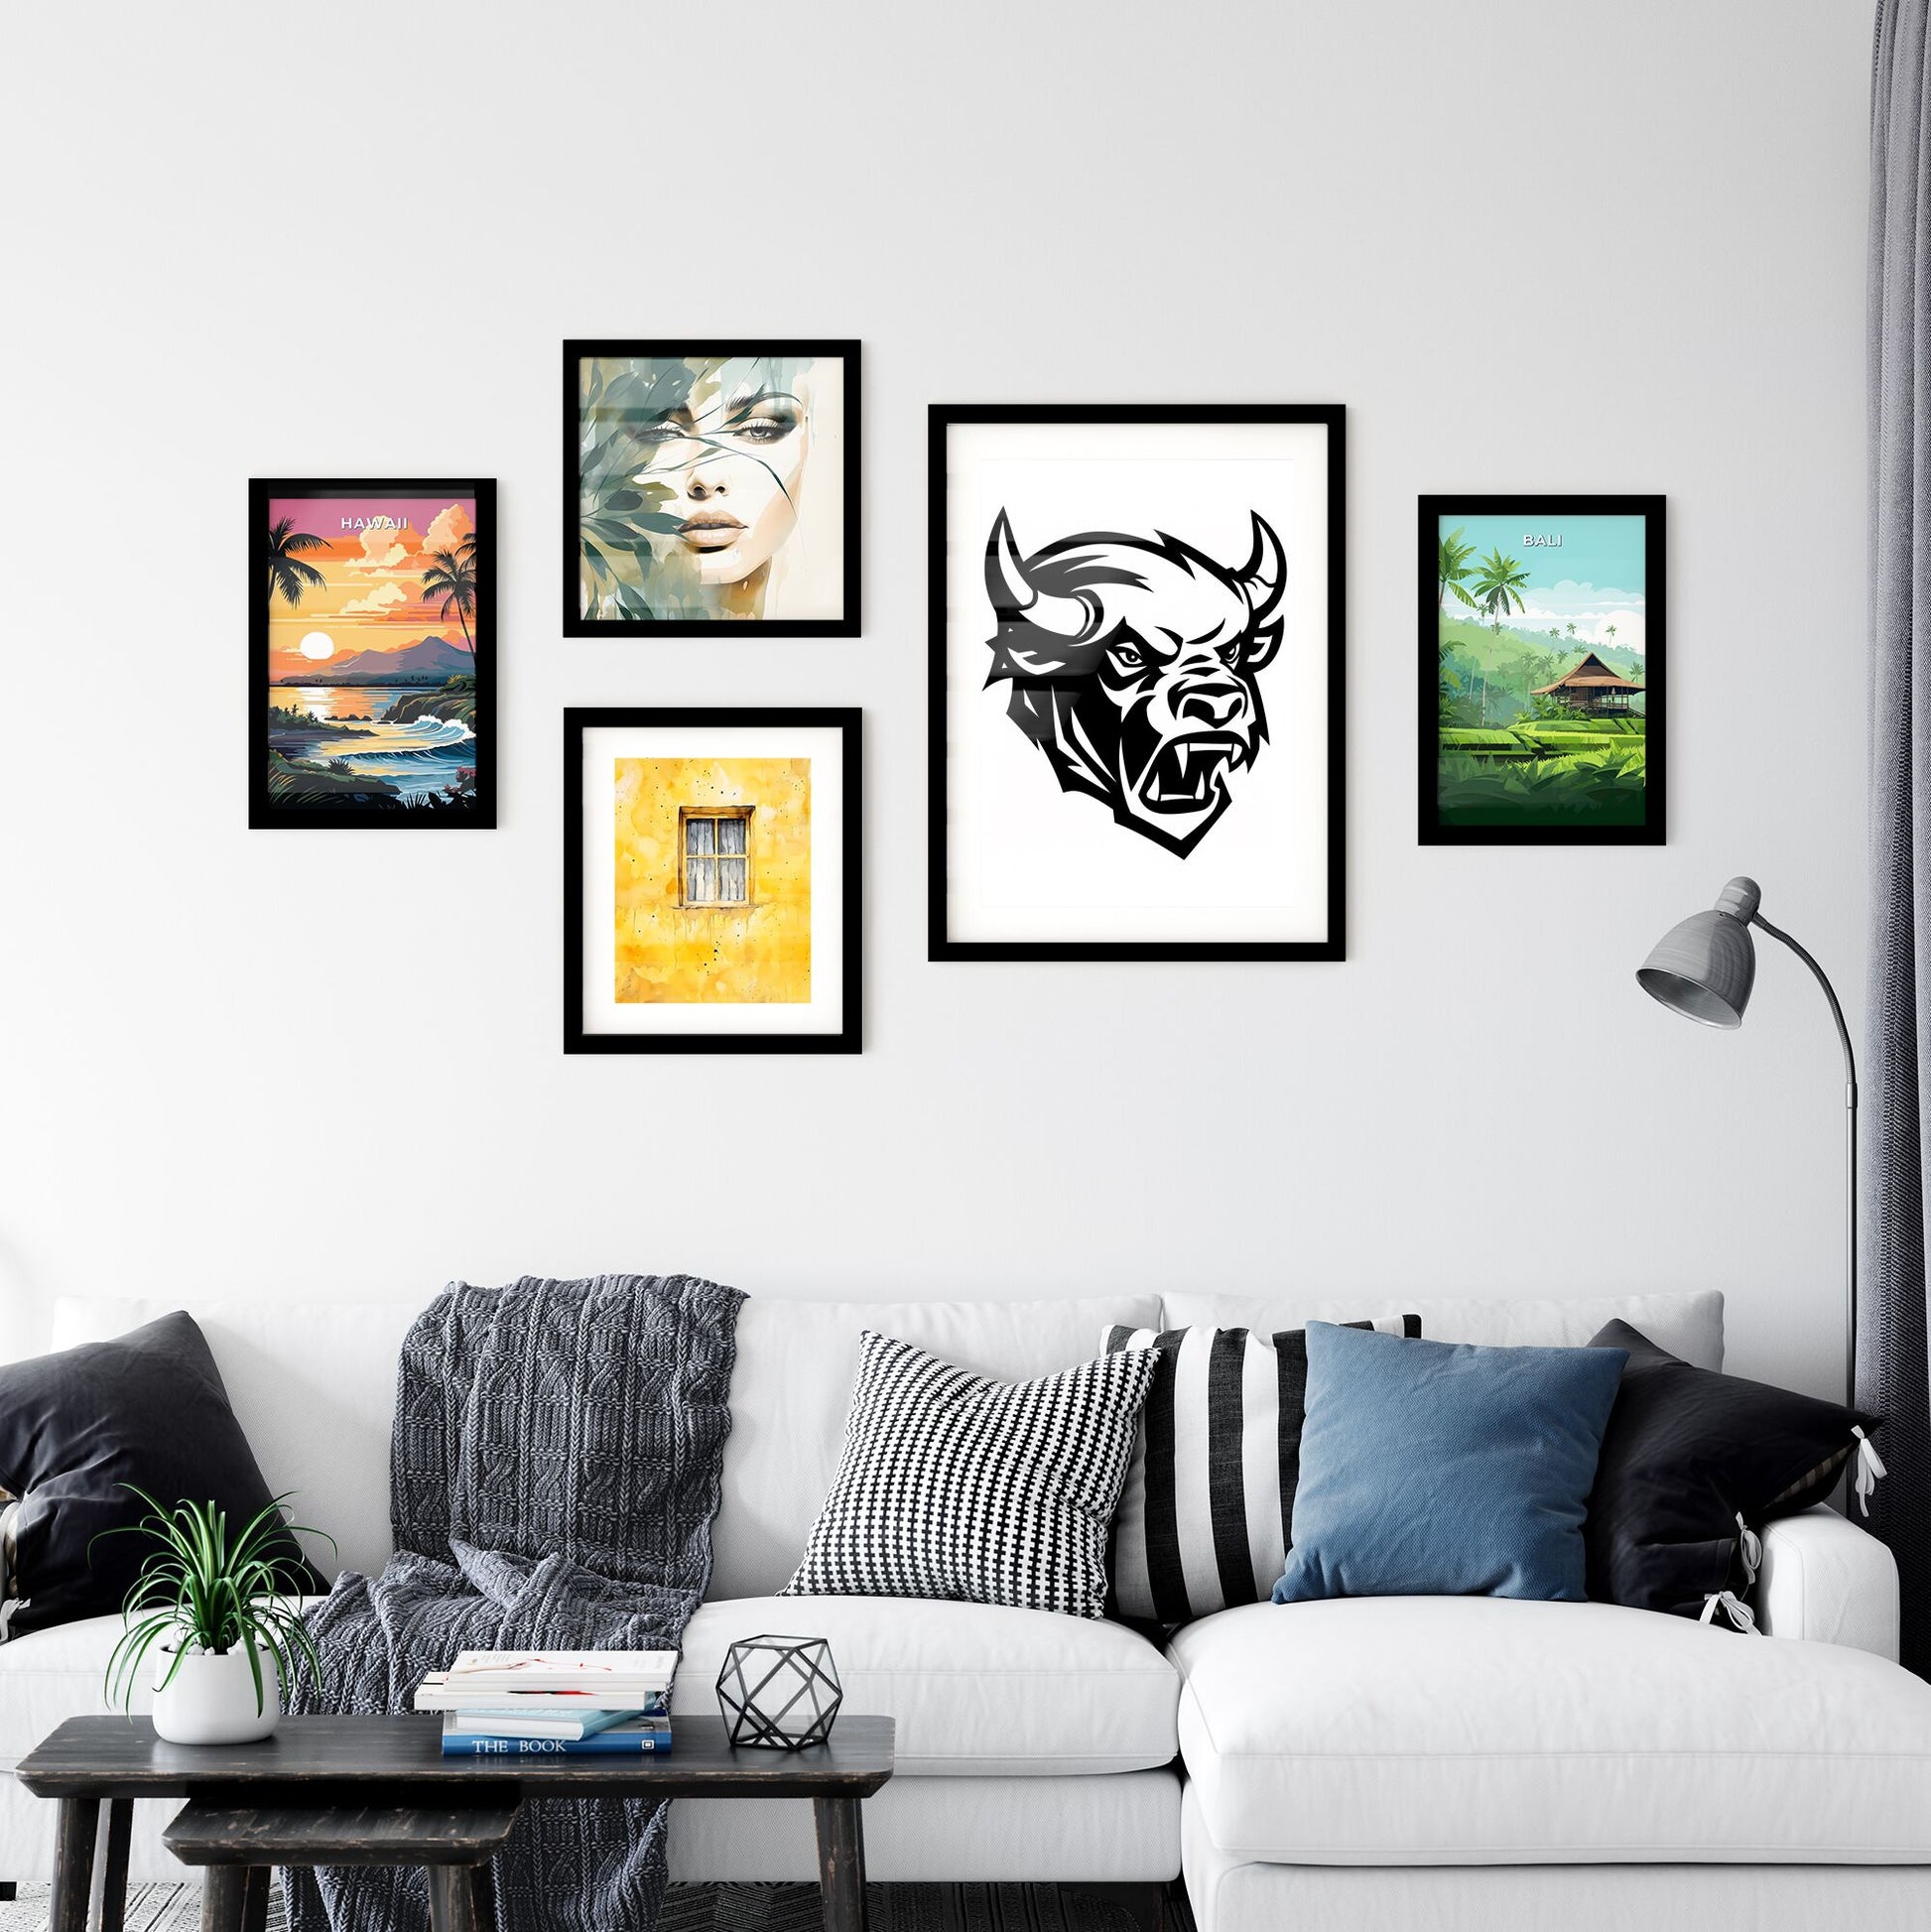 Bold and Vibrant Buffalo Art: Vinyl Sticker Style, Black and White Painting with Clean White Background - Clear, High-Quality Image Default Title